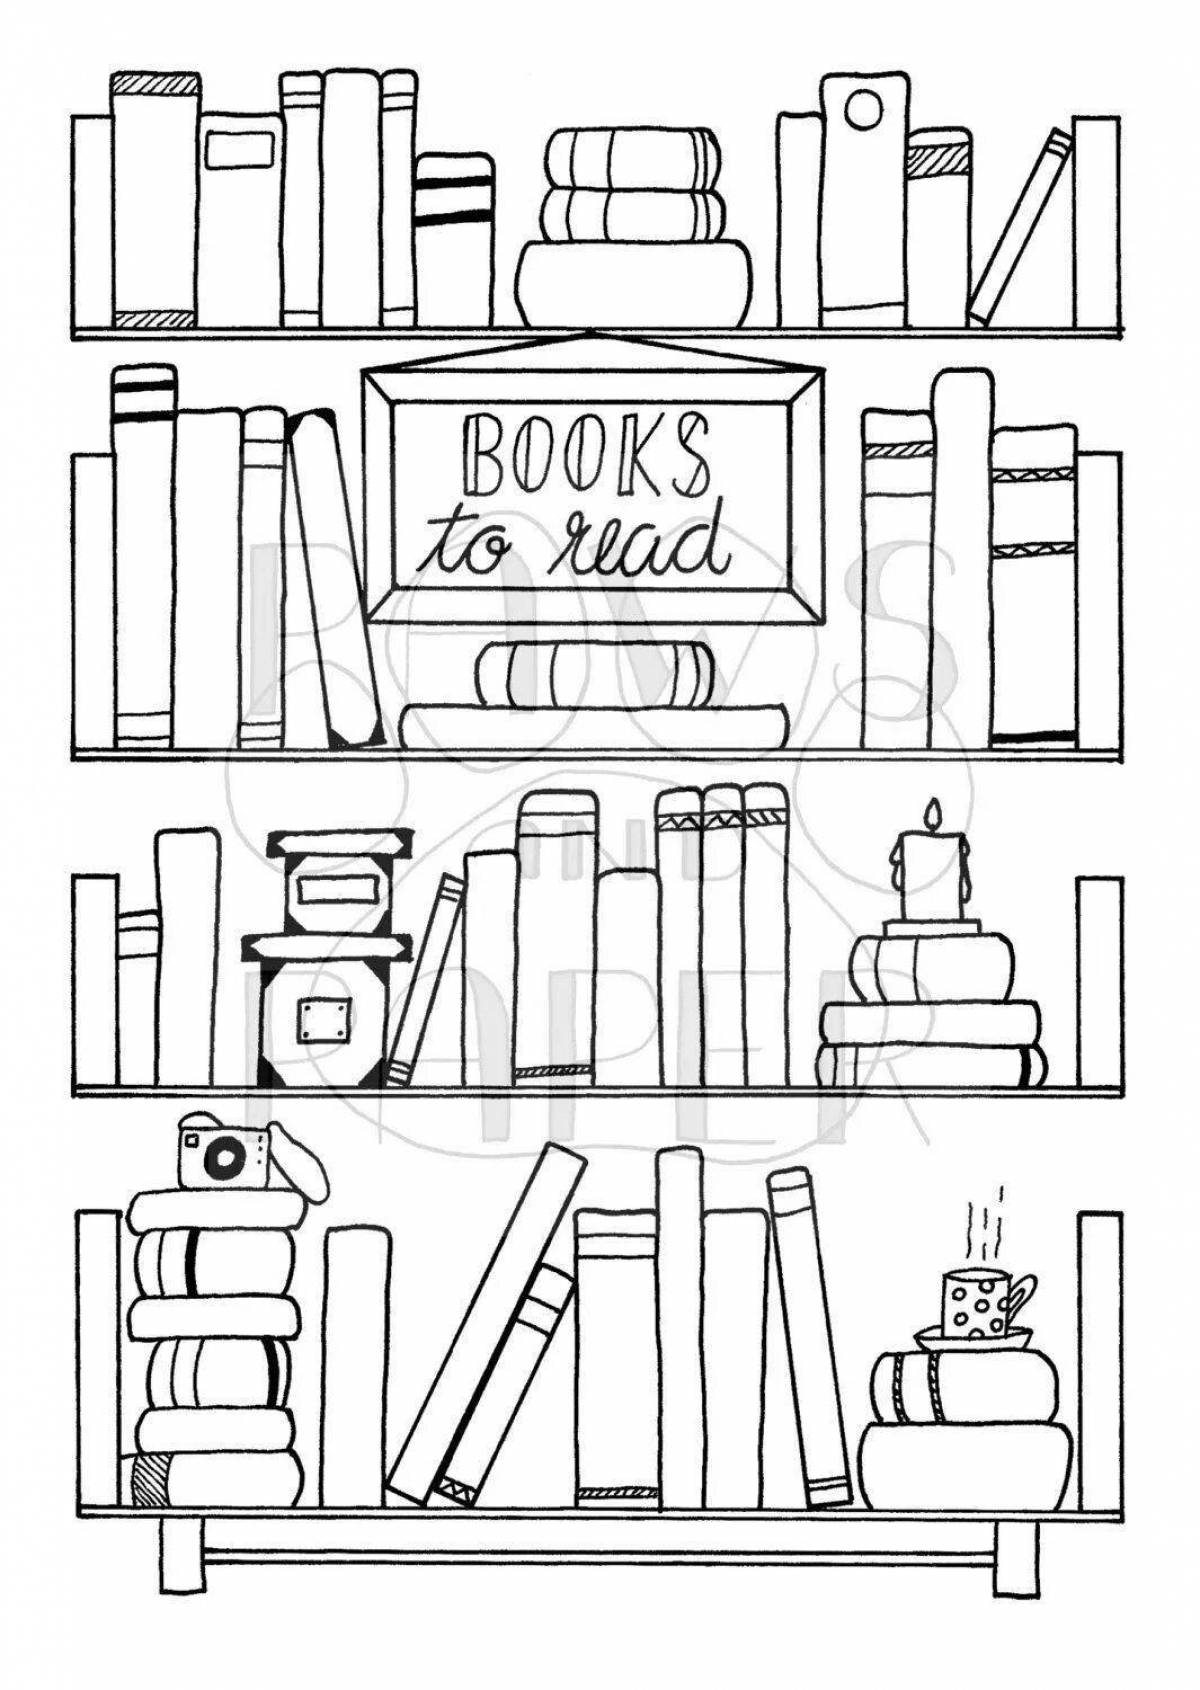 Coloring book sweet shelf with books